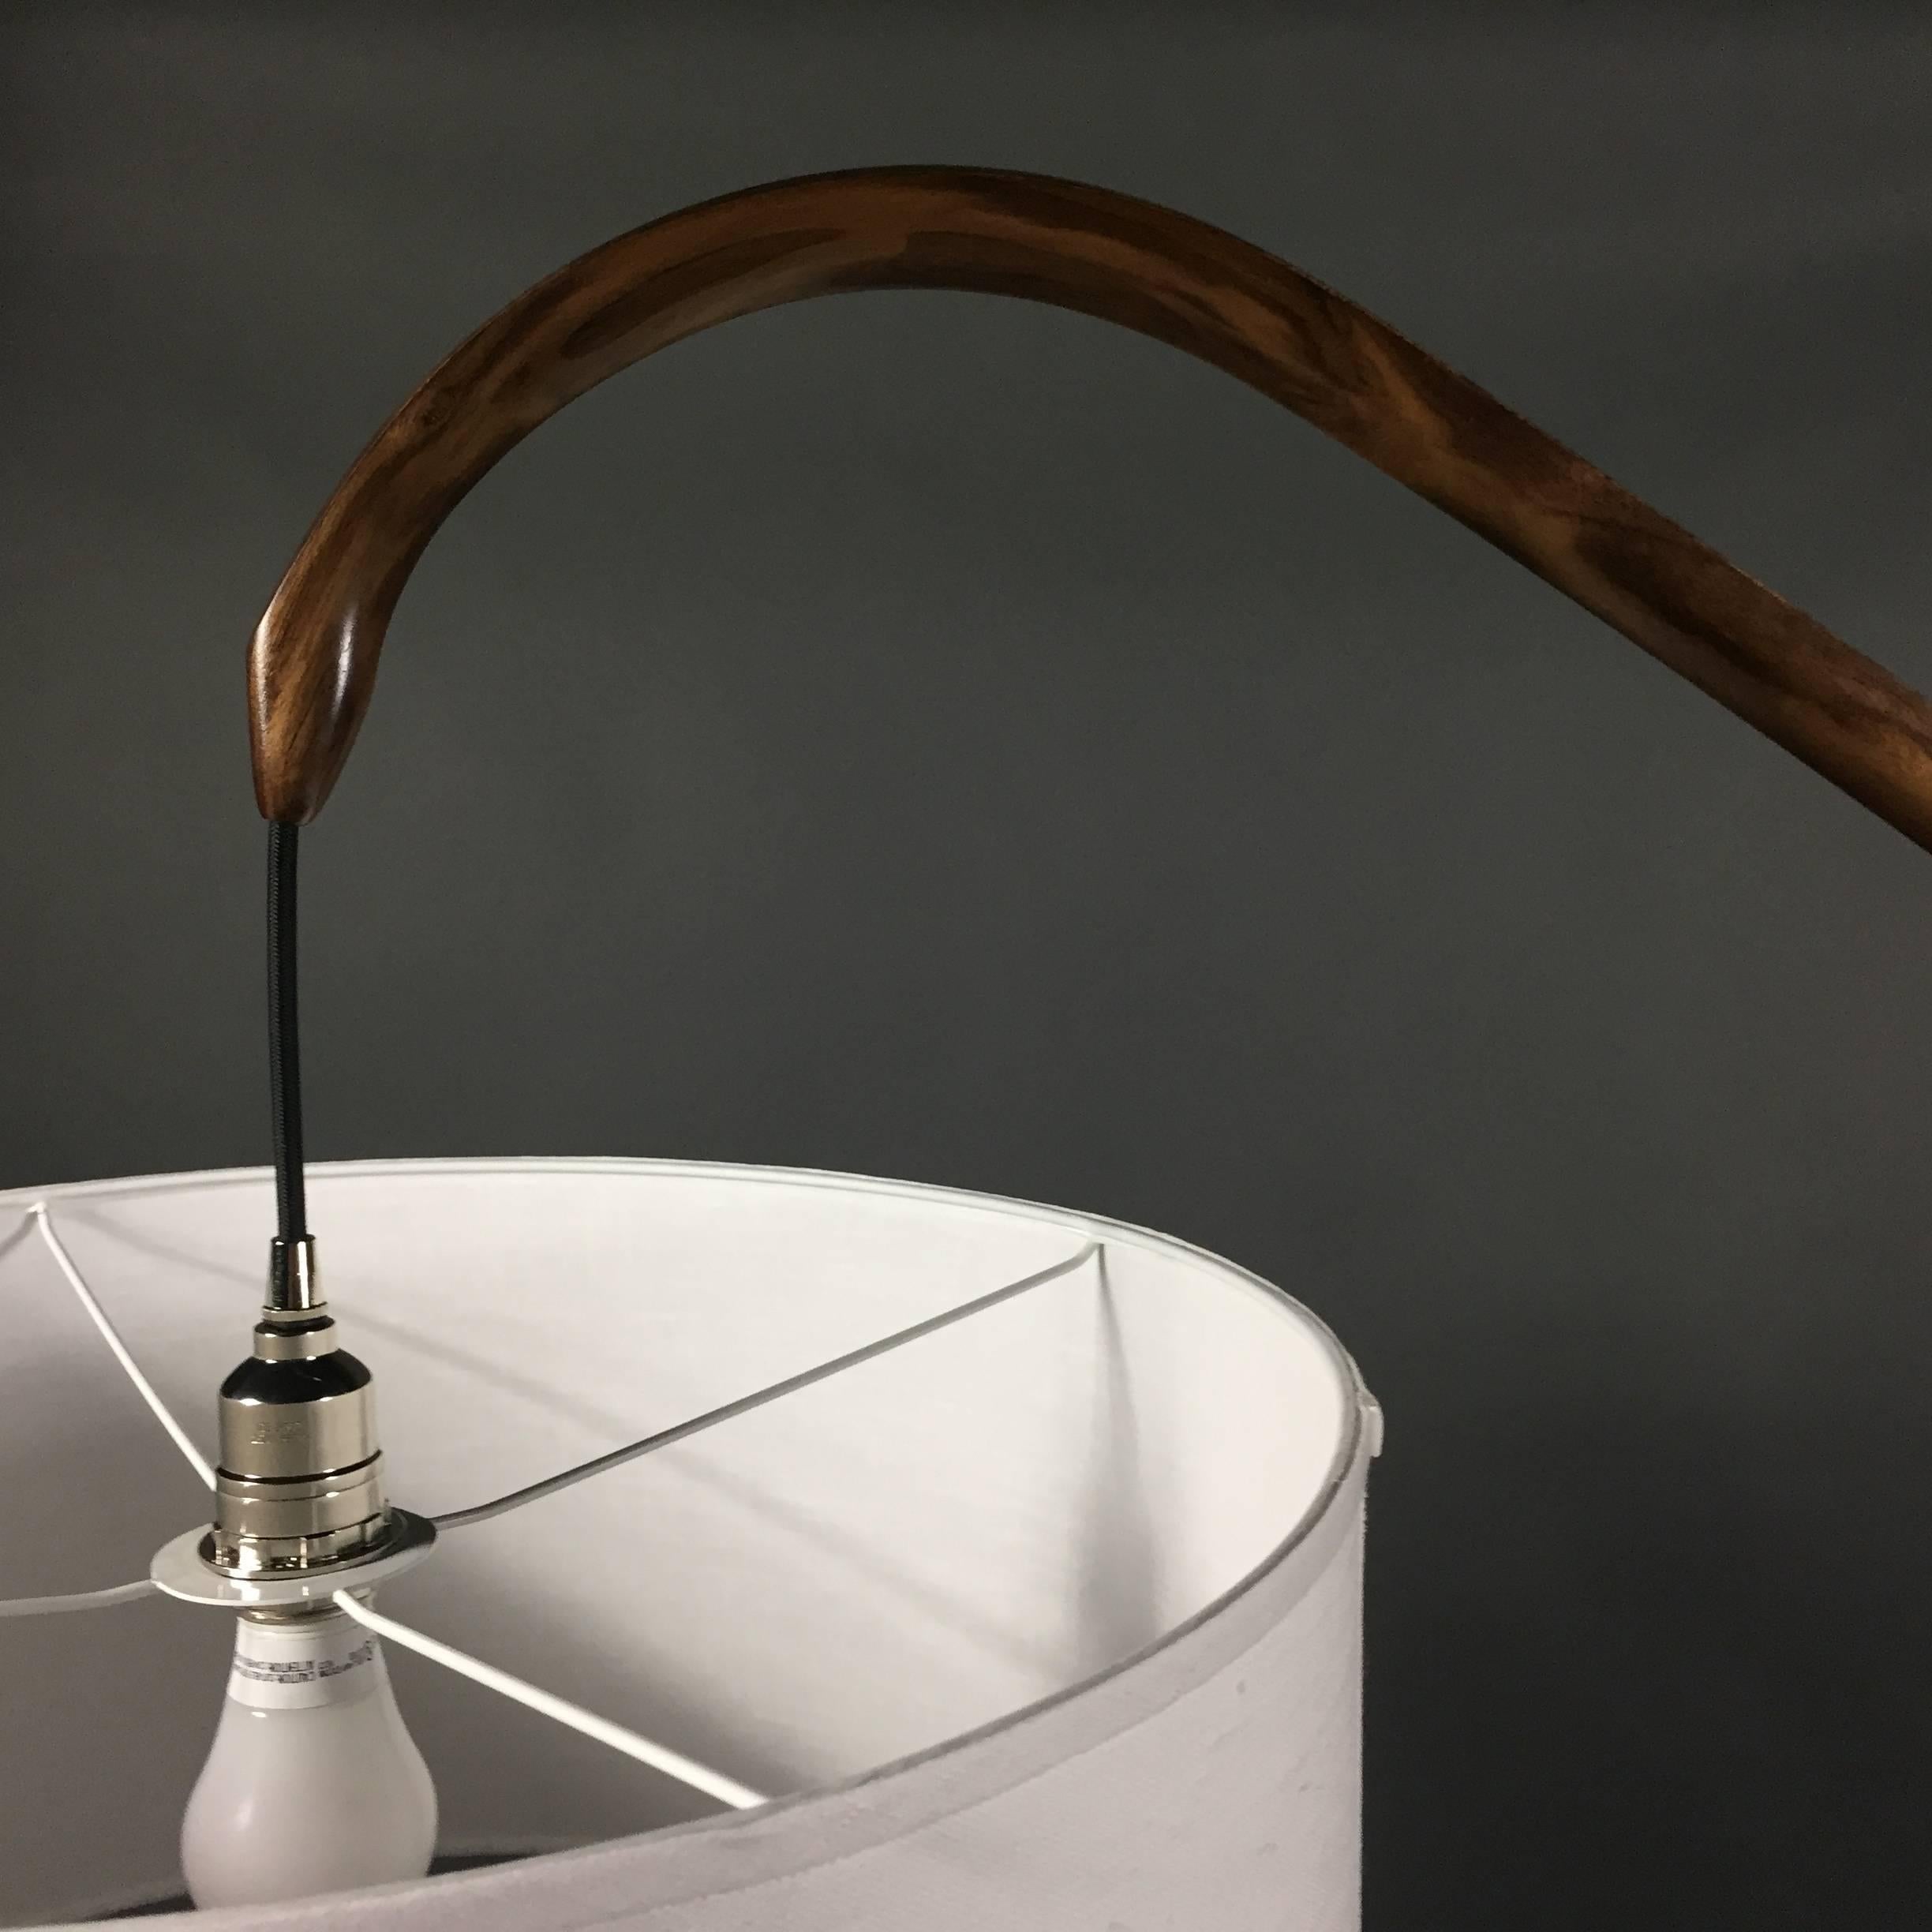 Master craftsman, Daniel Oates created this gorgeous standing lamp in solid walnut that he personally steam-bent in his Sharon CT studio. Graceful curves along the entire length is supported by a tri-pod base. Integrated black cording, white shade